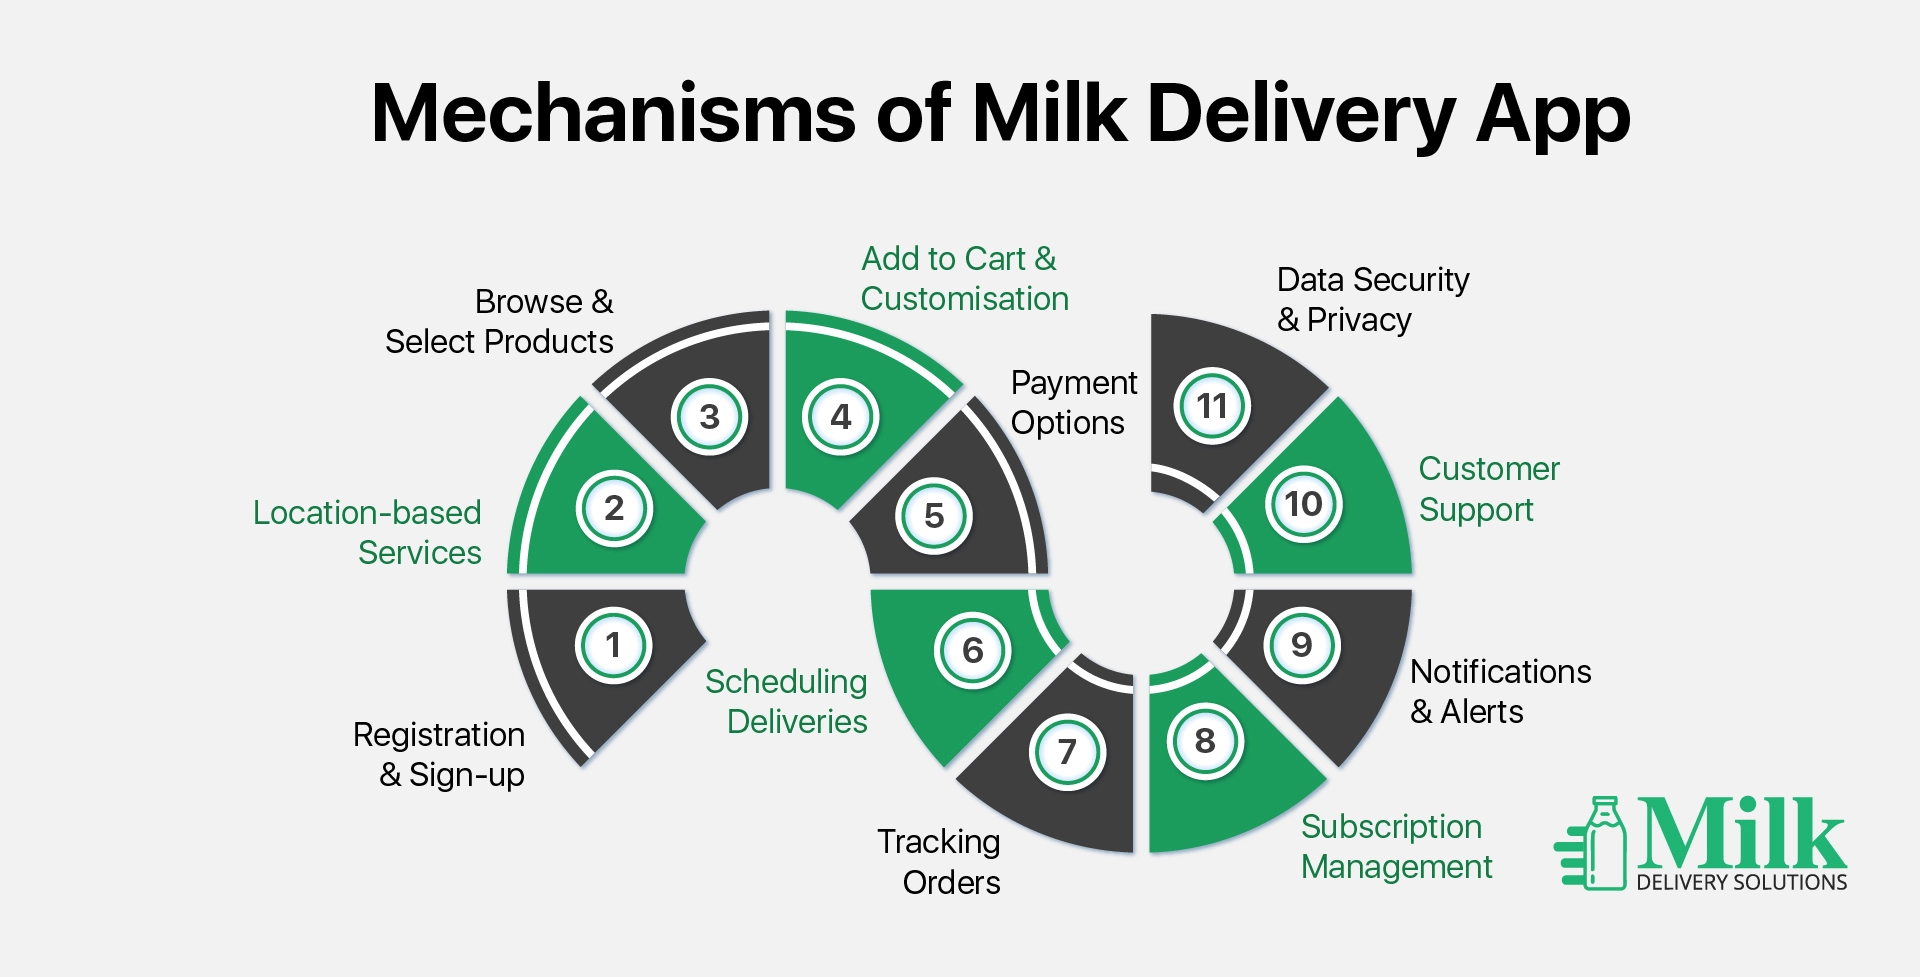 ravi garg, mds, mechanism, milk delivery app, register and sign-up, location-based service, select product, customisation, scheduled delivery, payments, subscription, tracking, notifications, customer support, data security, privacy